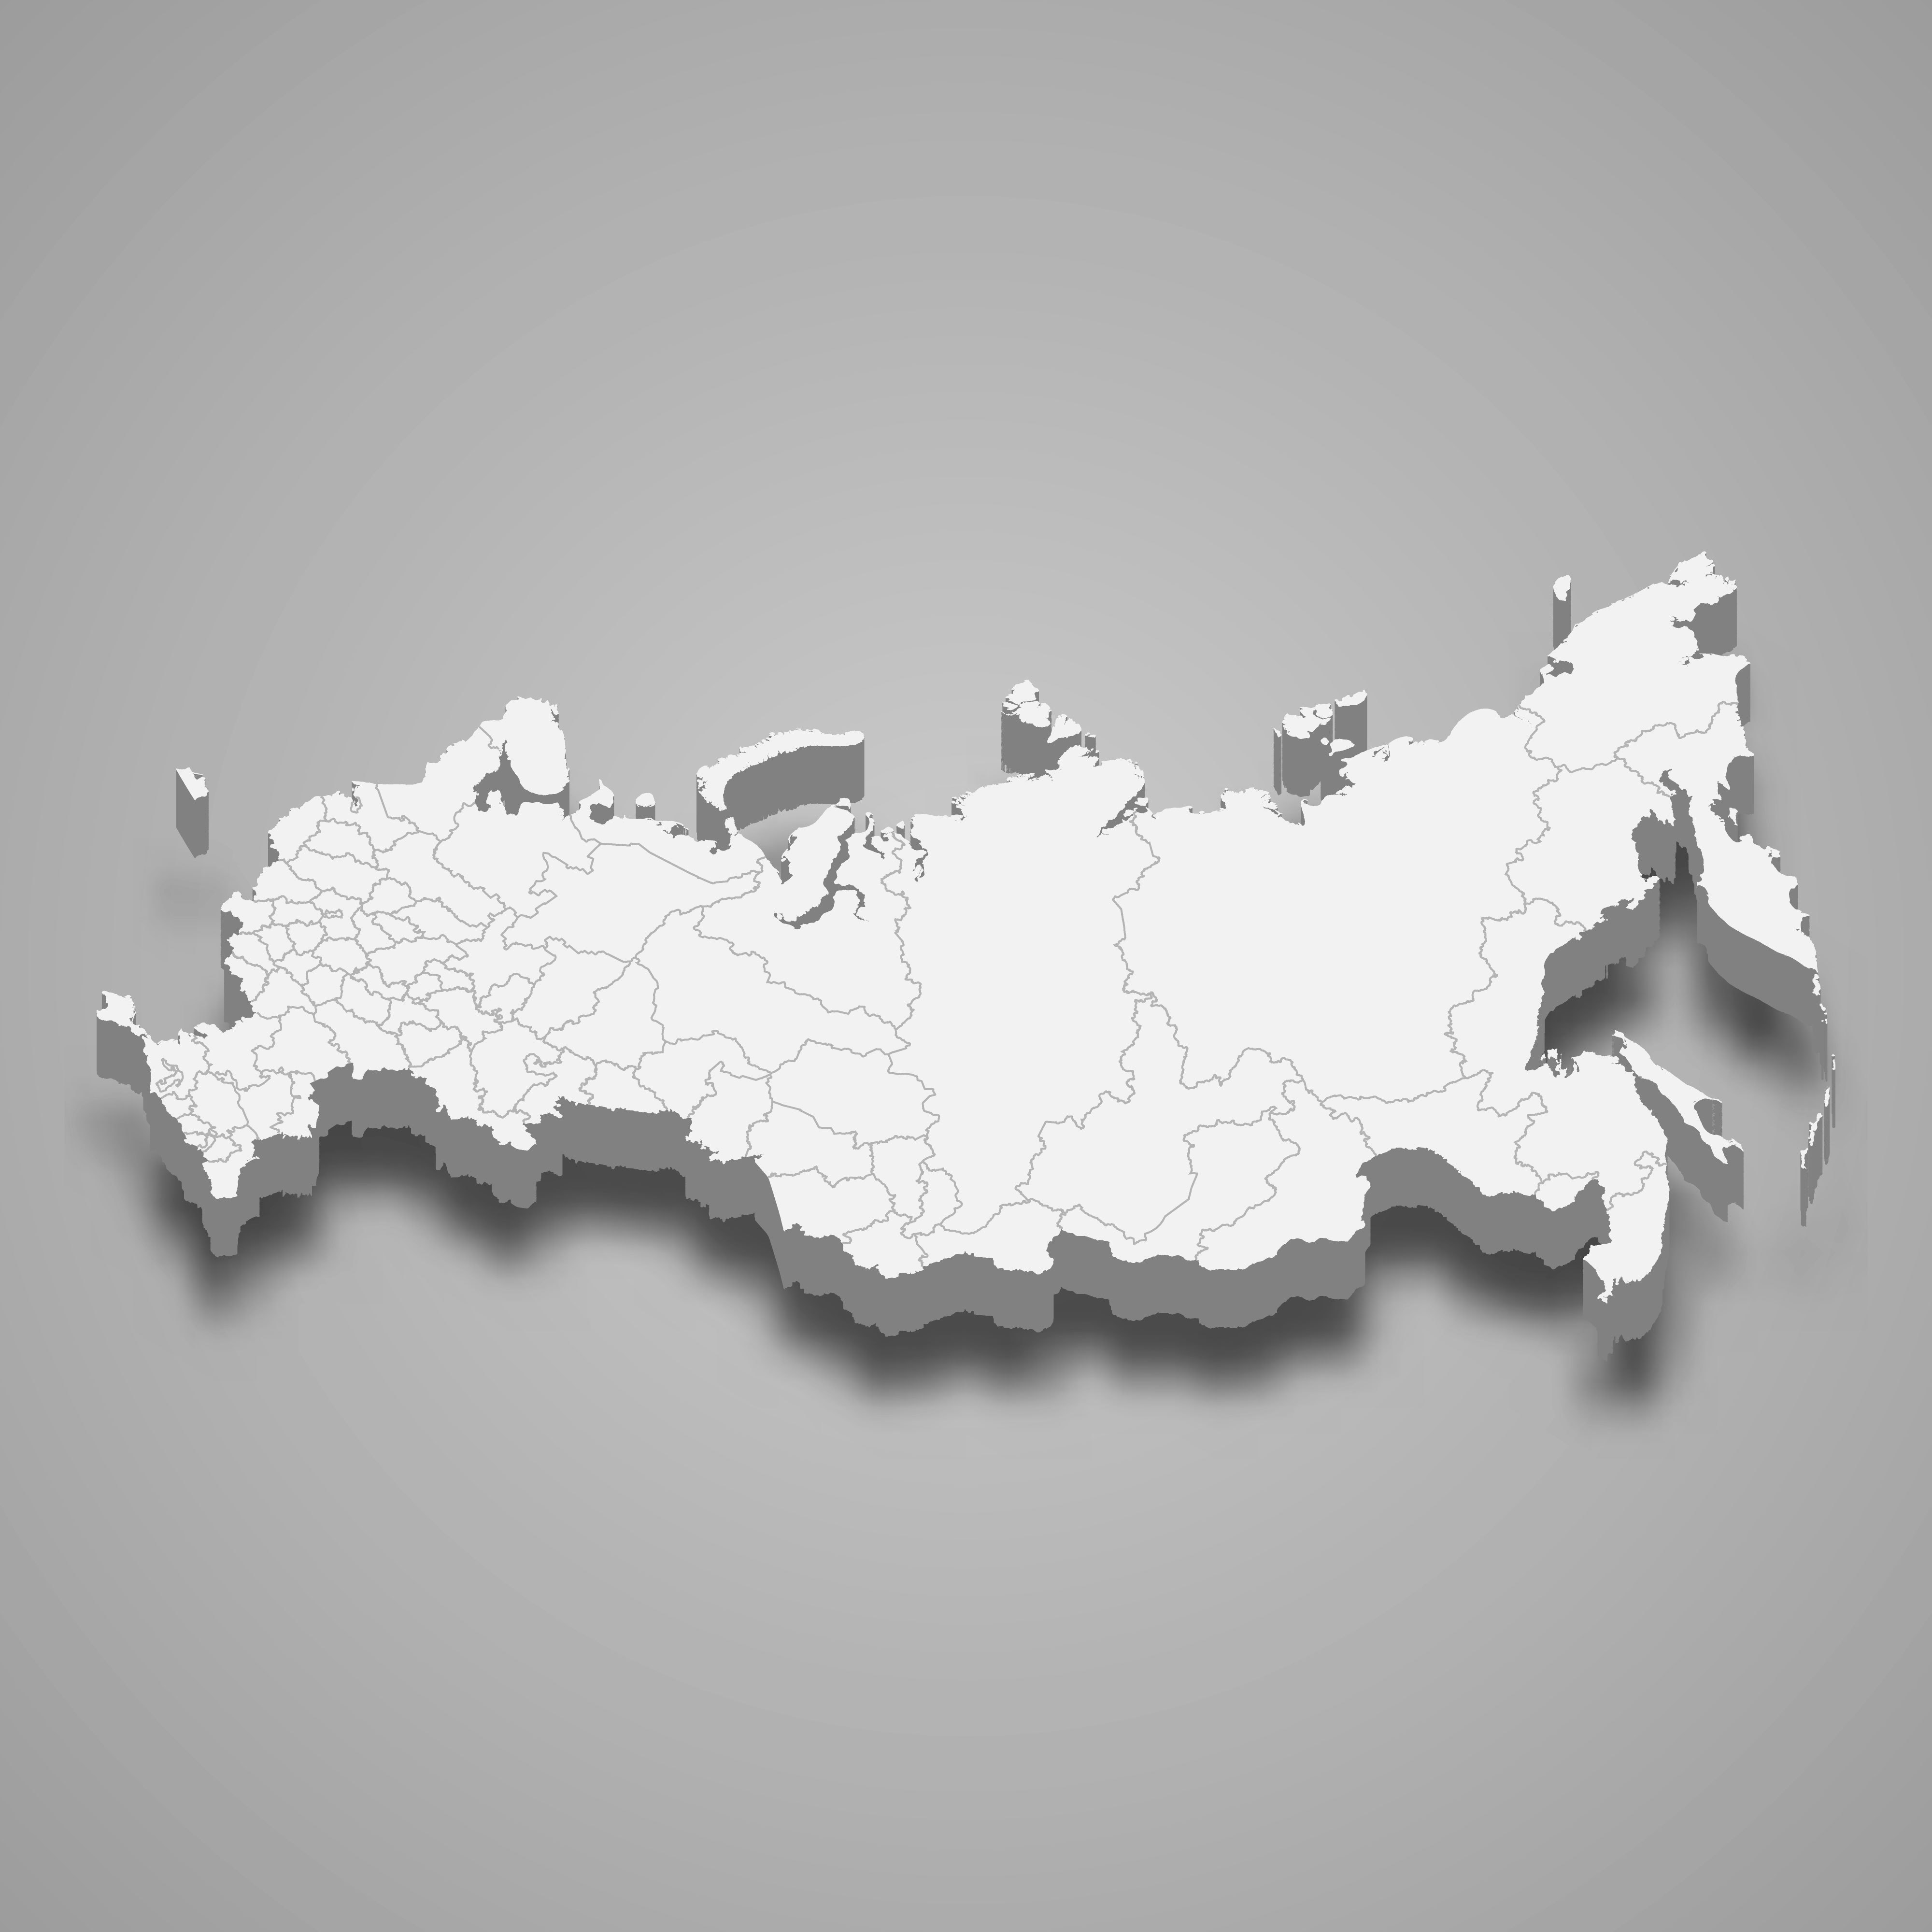 3d map of Russia with borders of regions. 3d map with borders Template for your design